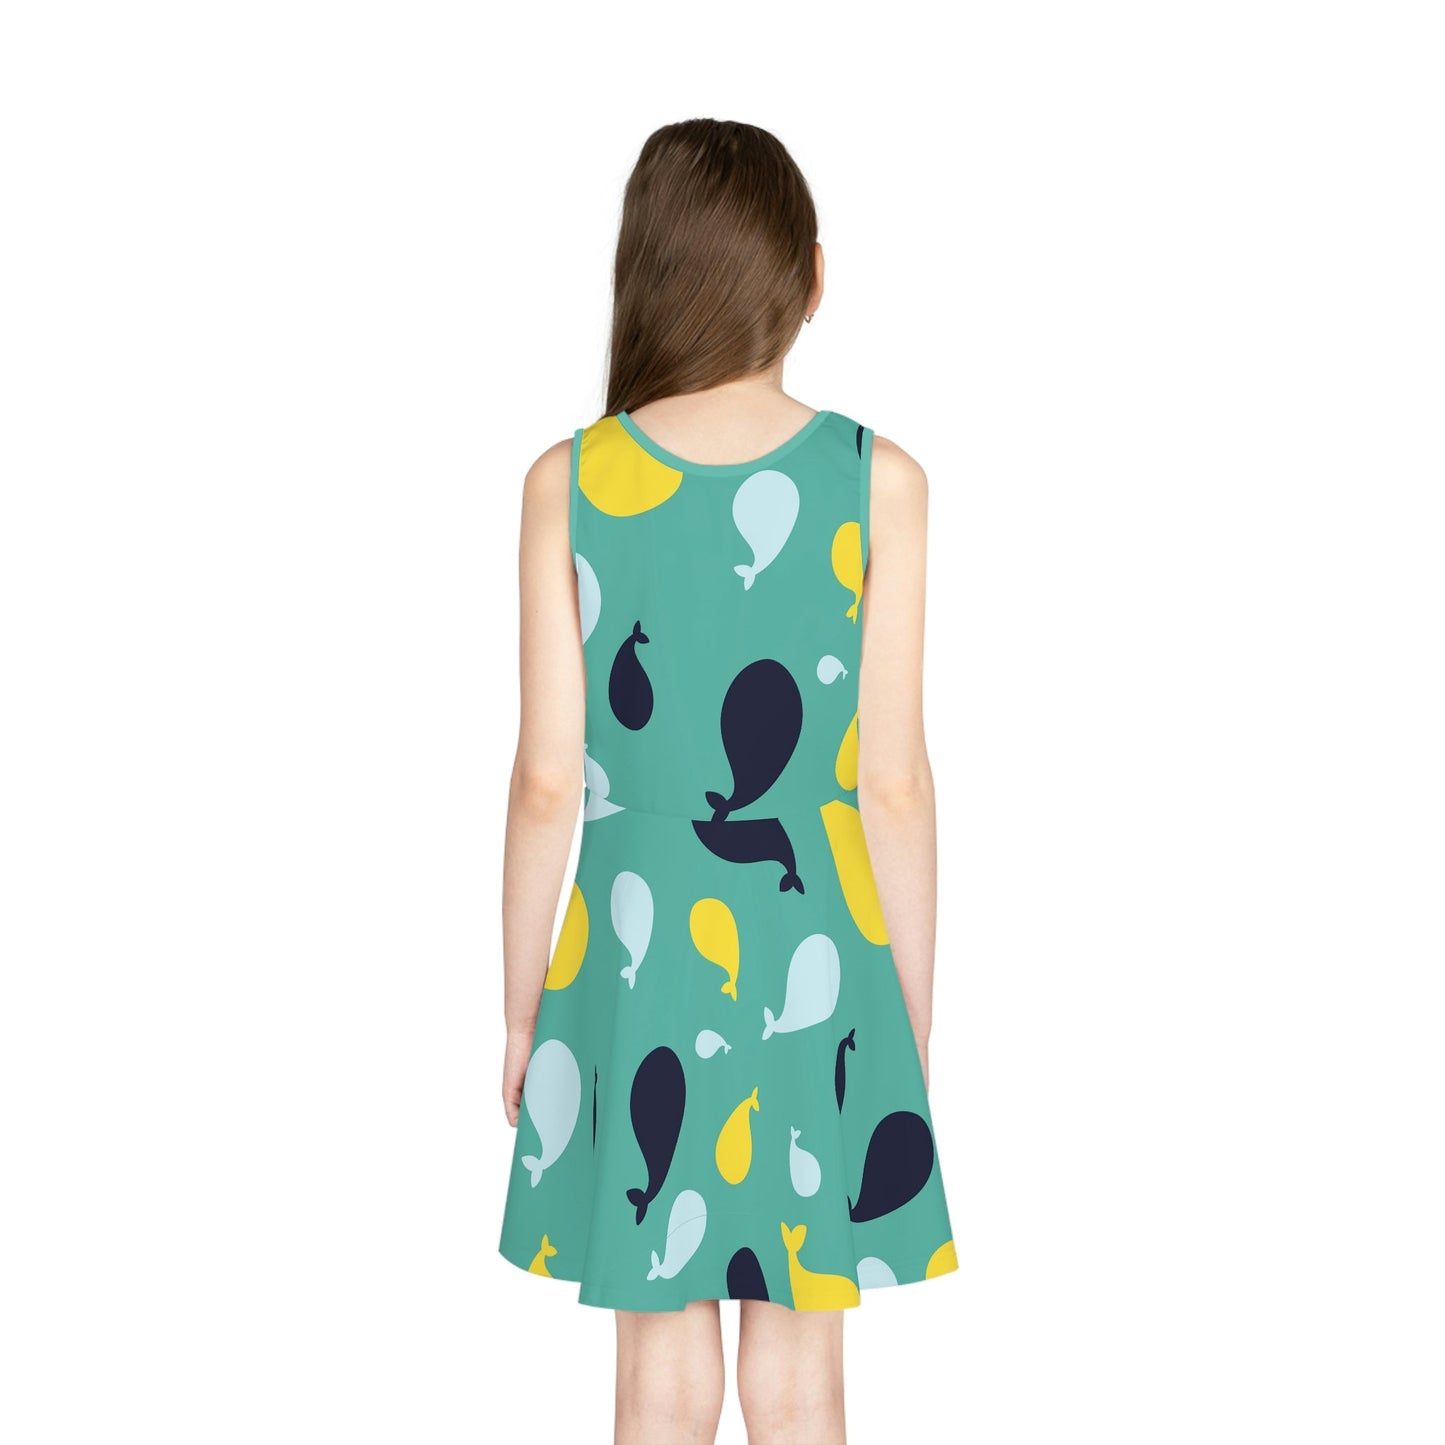 Coco Girls' Sleeveless Sundress All Over PrintAOPAOP Clothing#tag4##tag5##tag6#